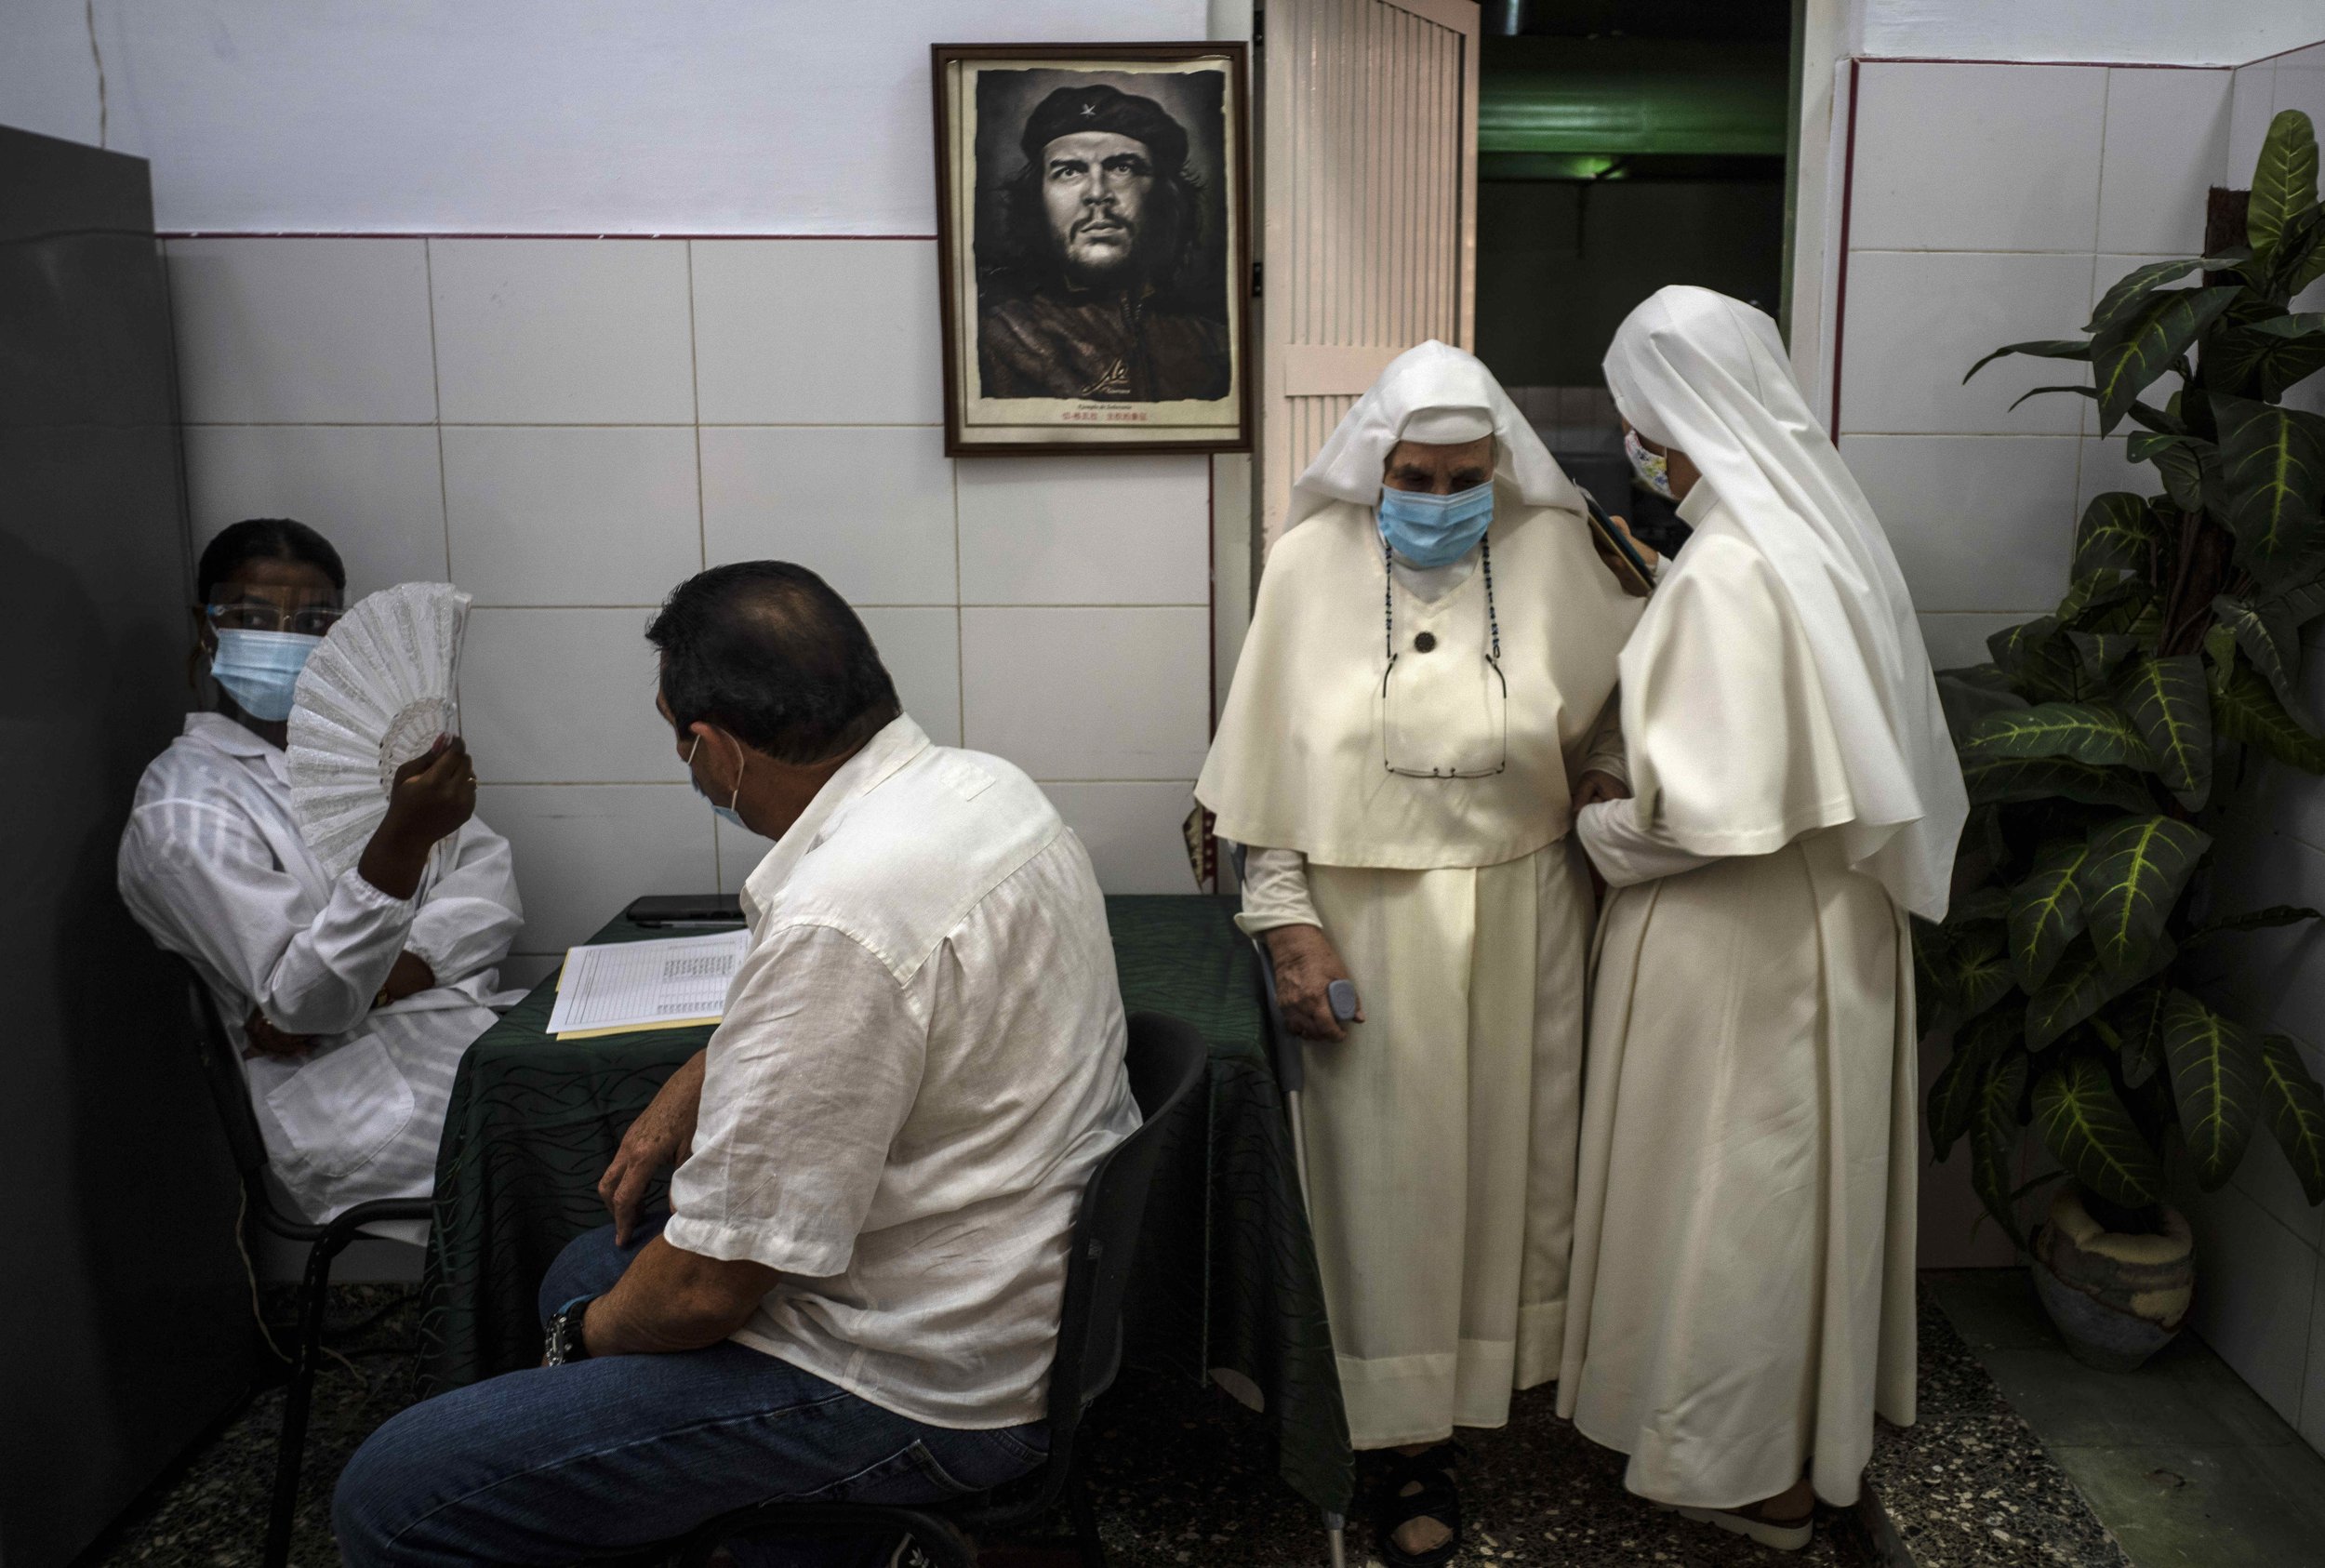  A framed image of Argentine-born Cuban Revolutionary hero Ernesto "Che" Guevara hangs on a wall as nuns leave after being inoculated with a dose of the Cuban Abdala COVID-19 vaccine, in Havana, Cuba, on June 23, 2021. (AP Photo/Ramon Espinosa) 